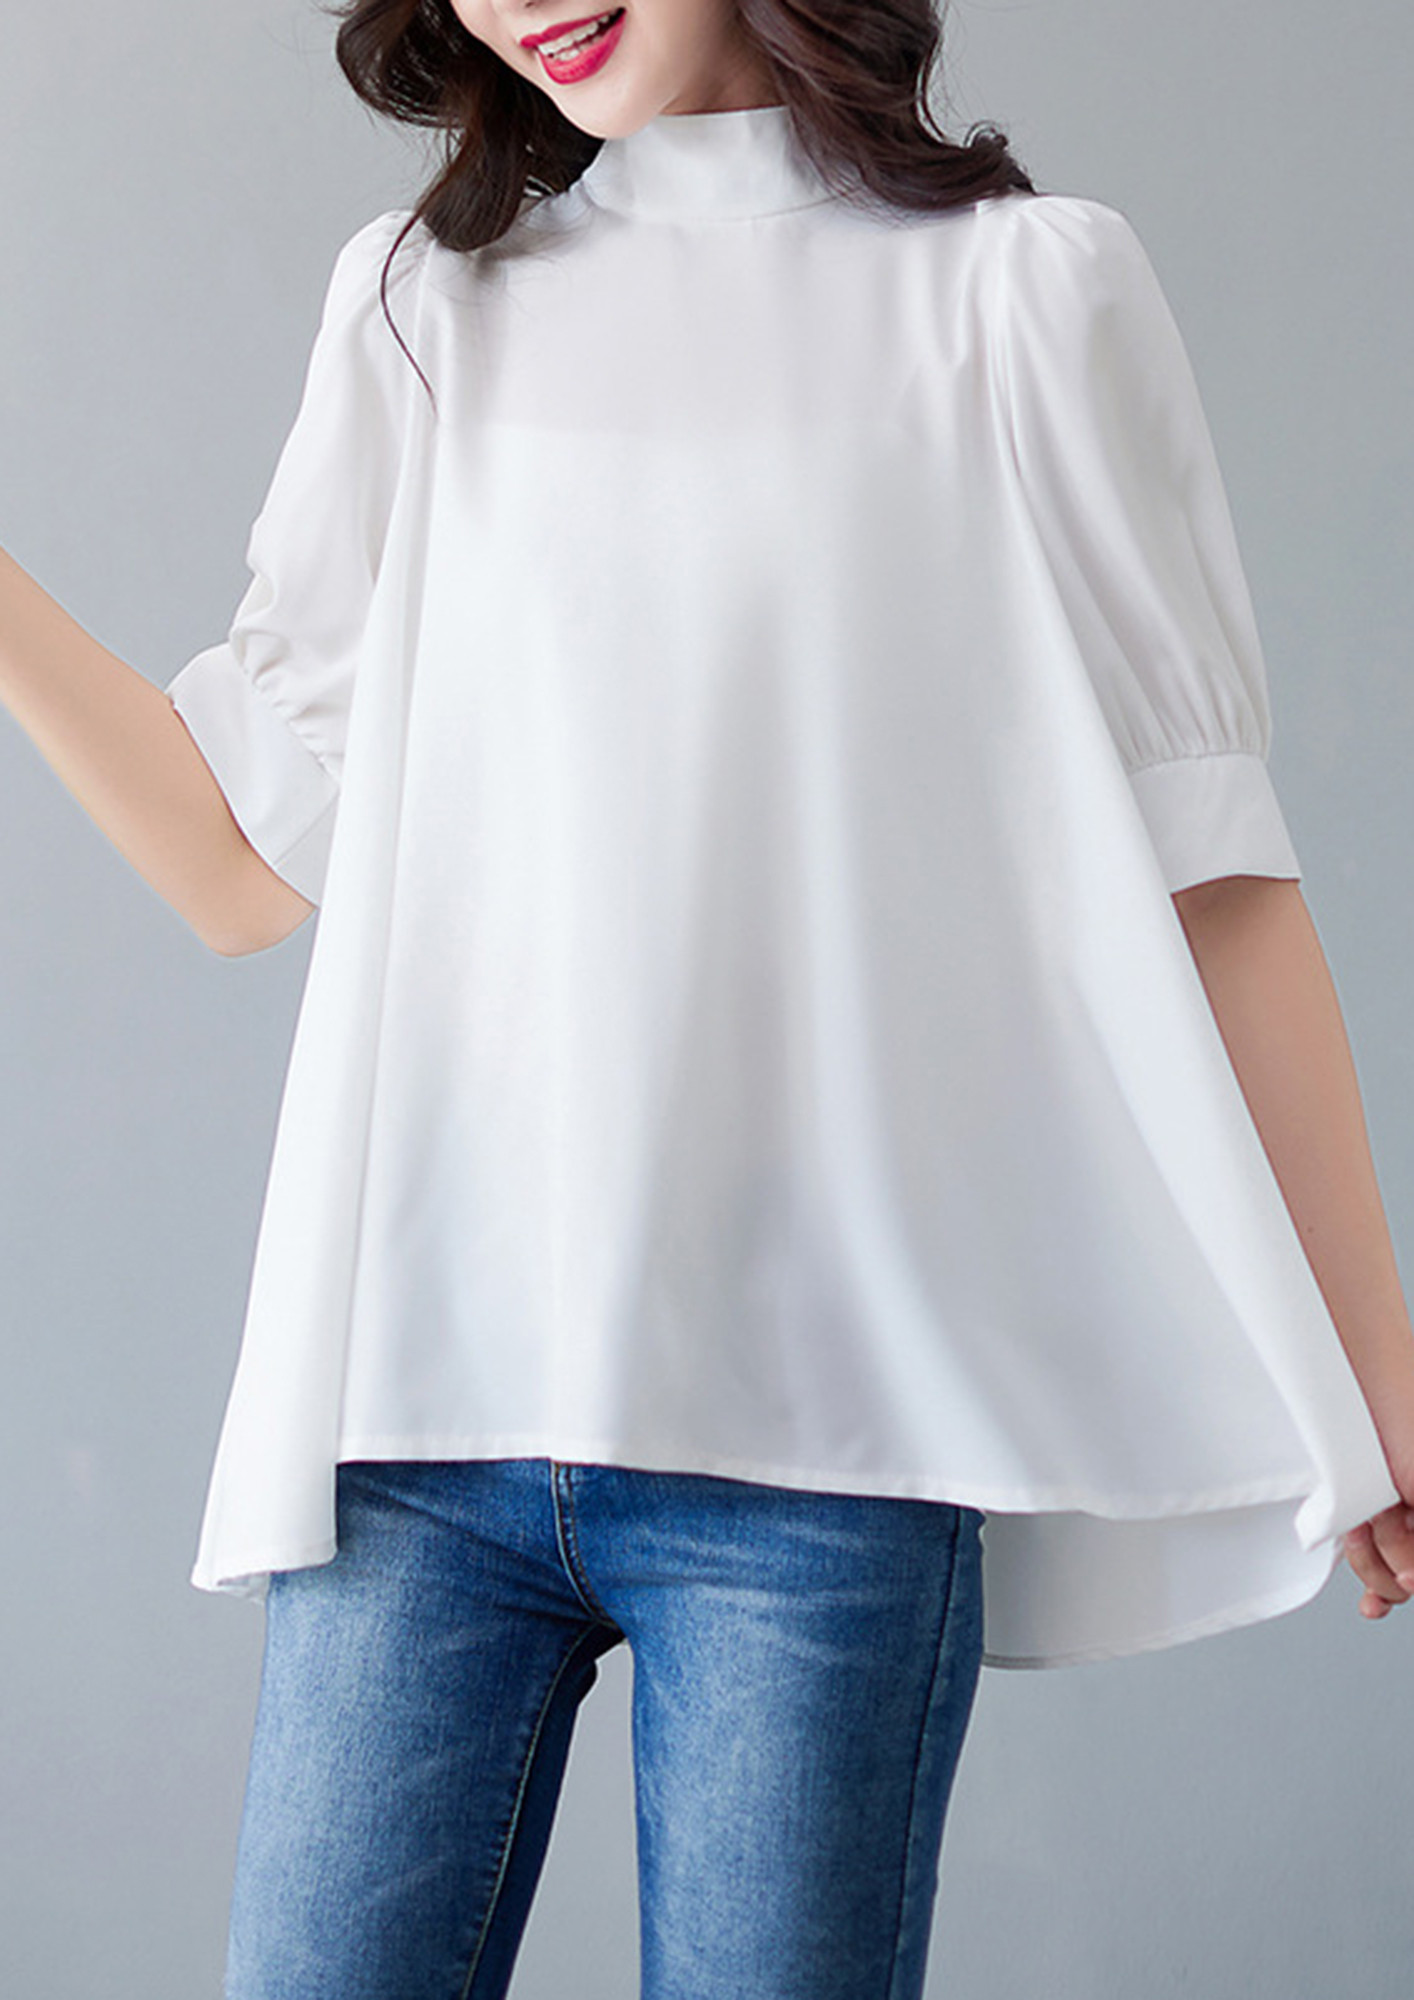 DOSE OF SIMPLICITY WHITE TOP